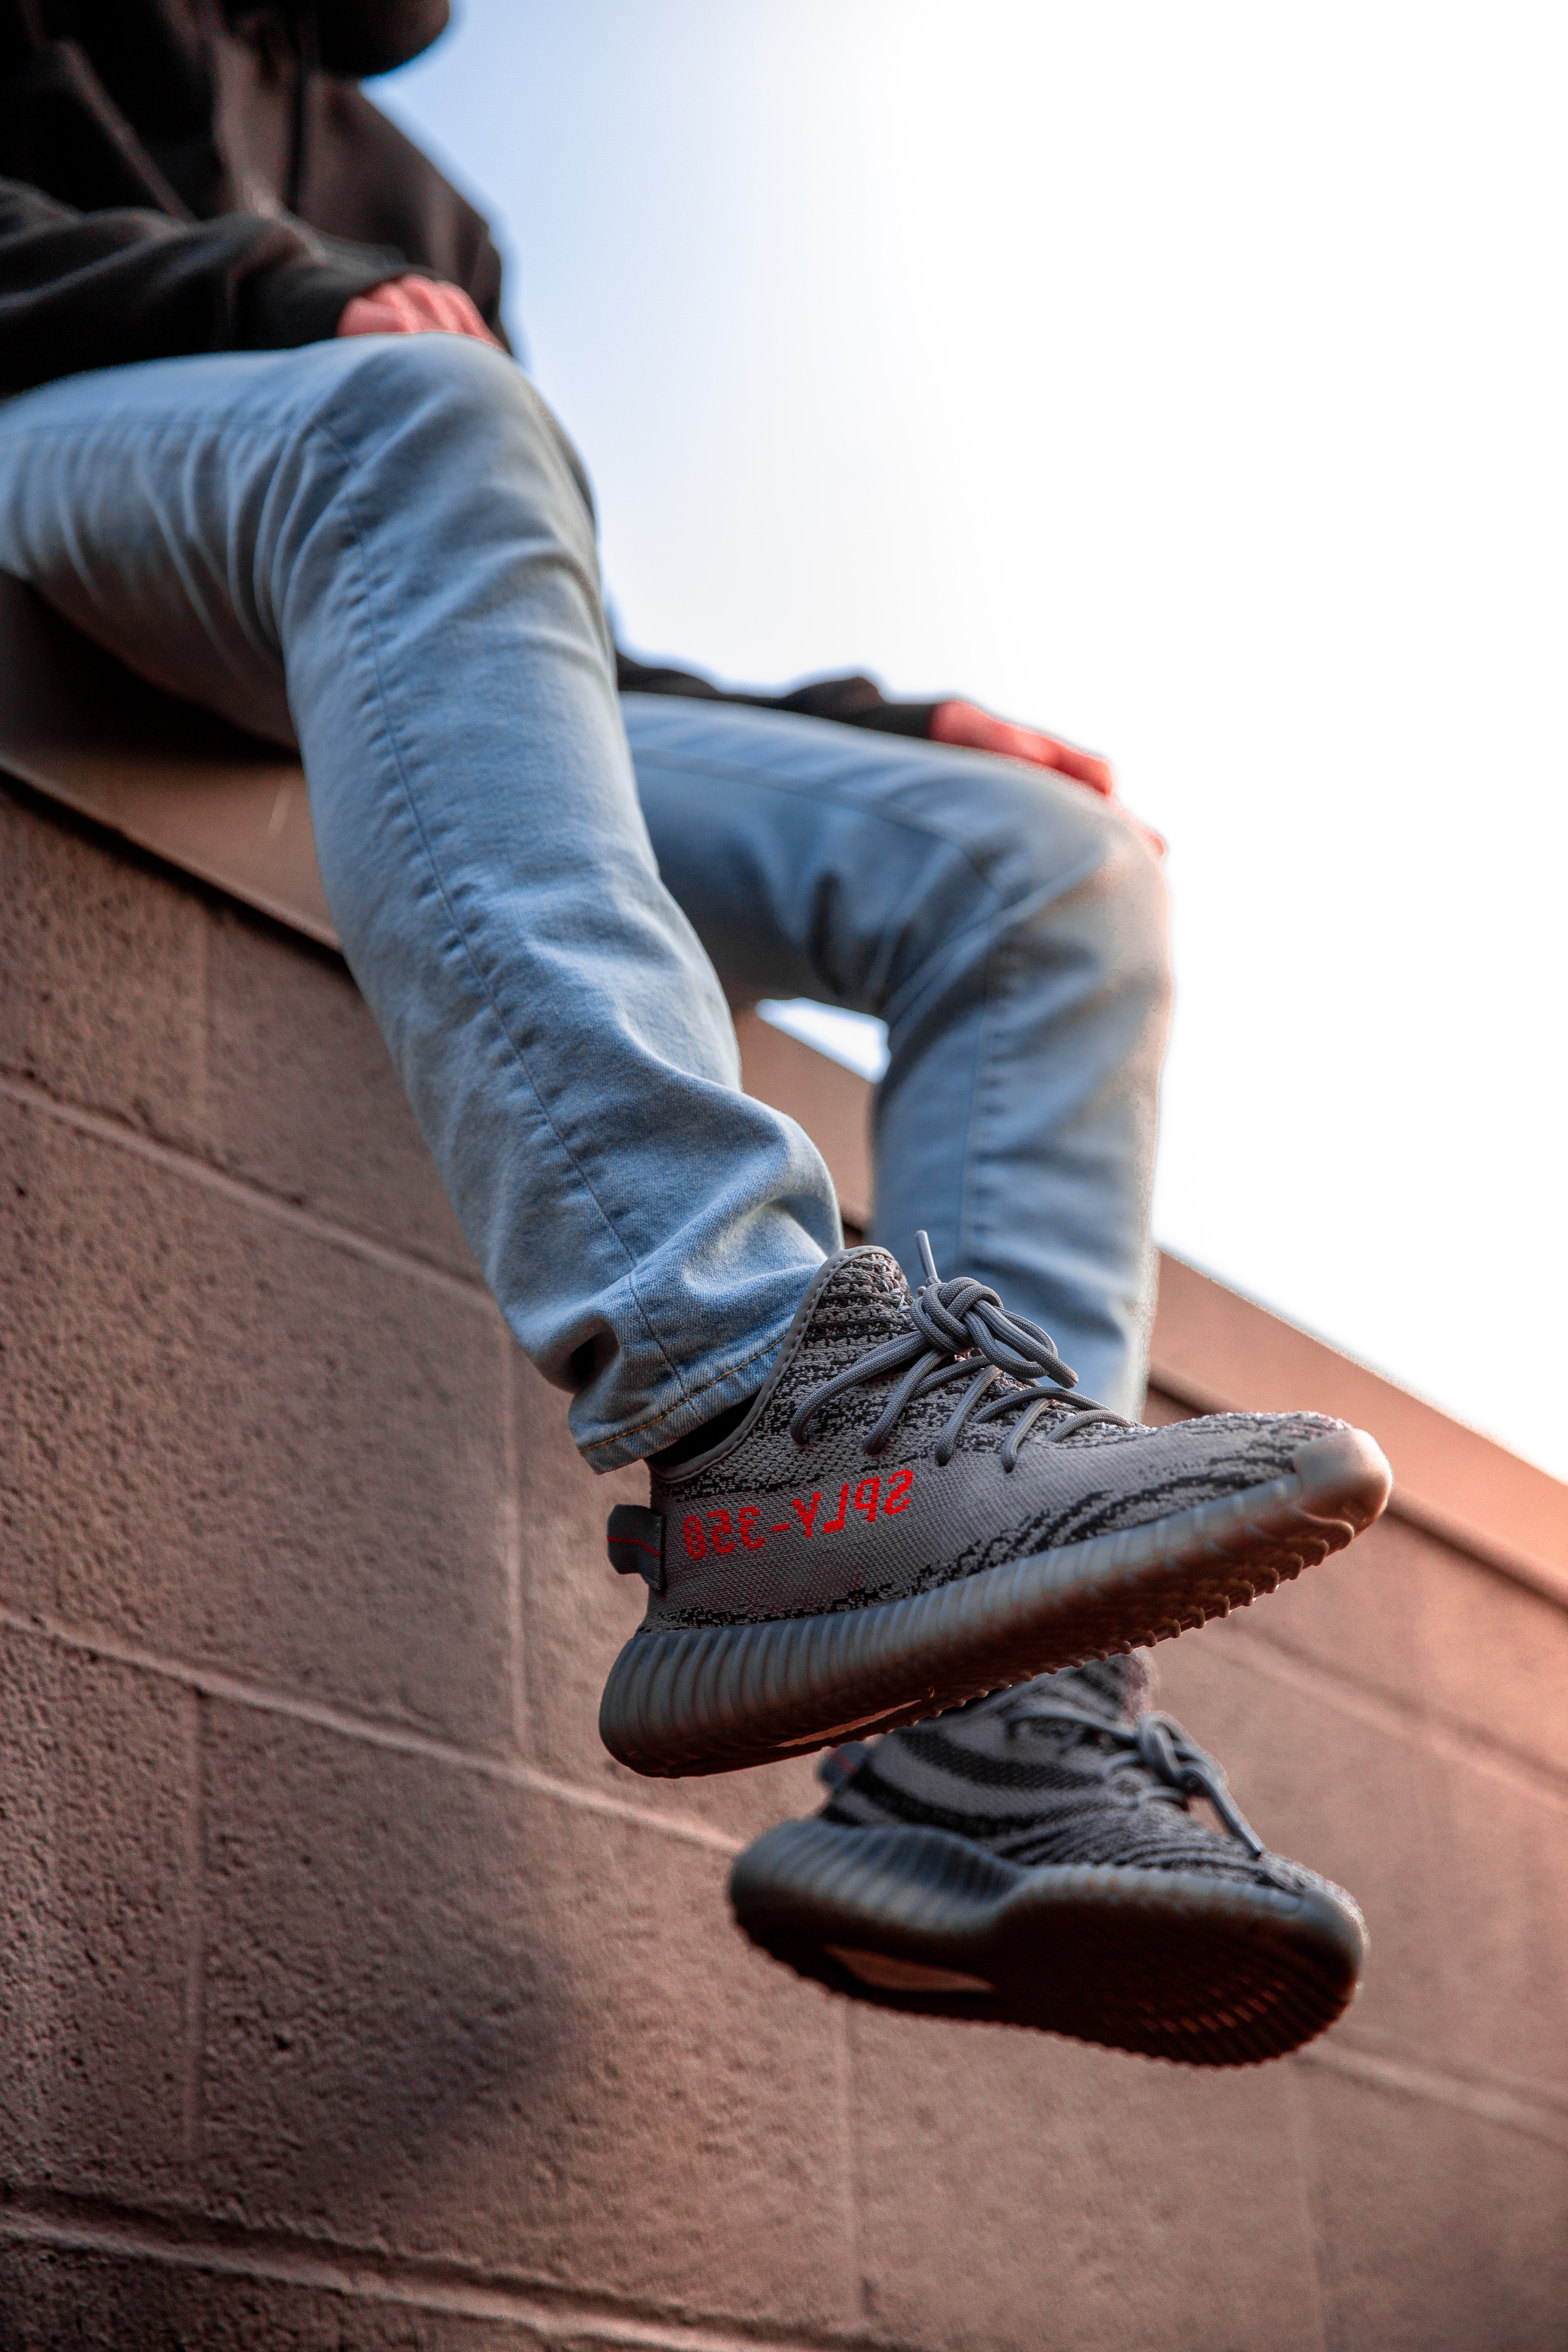 Yeezy Shoes Wallpapers